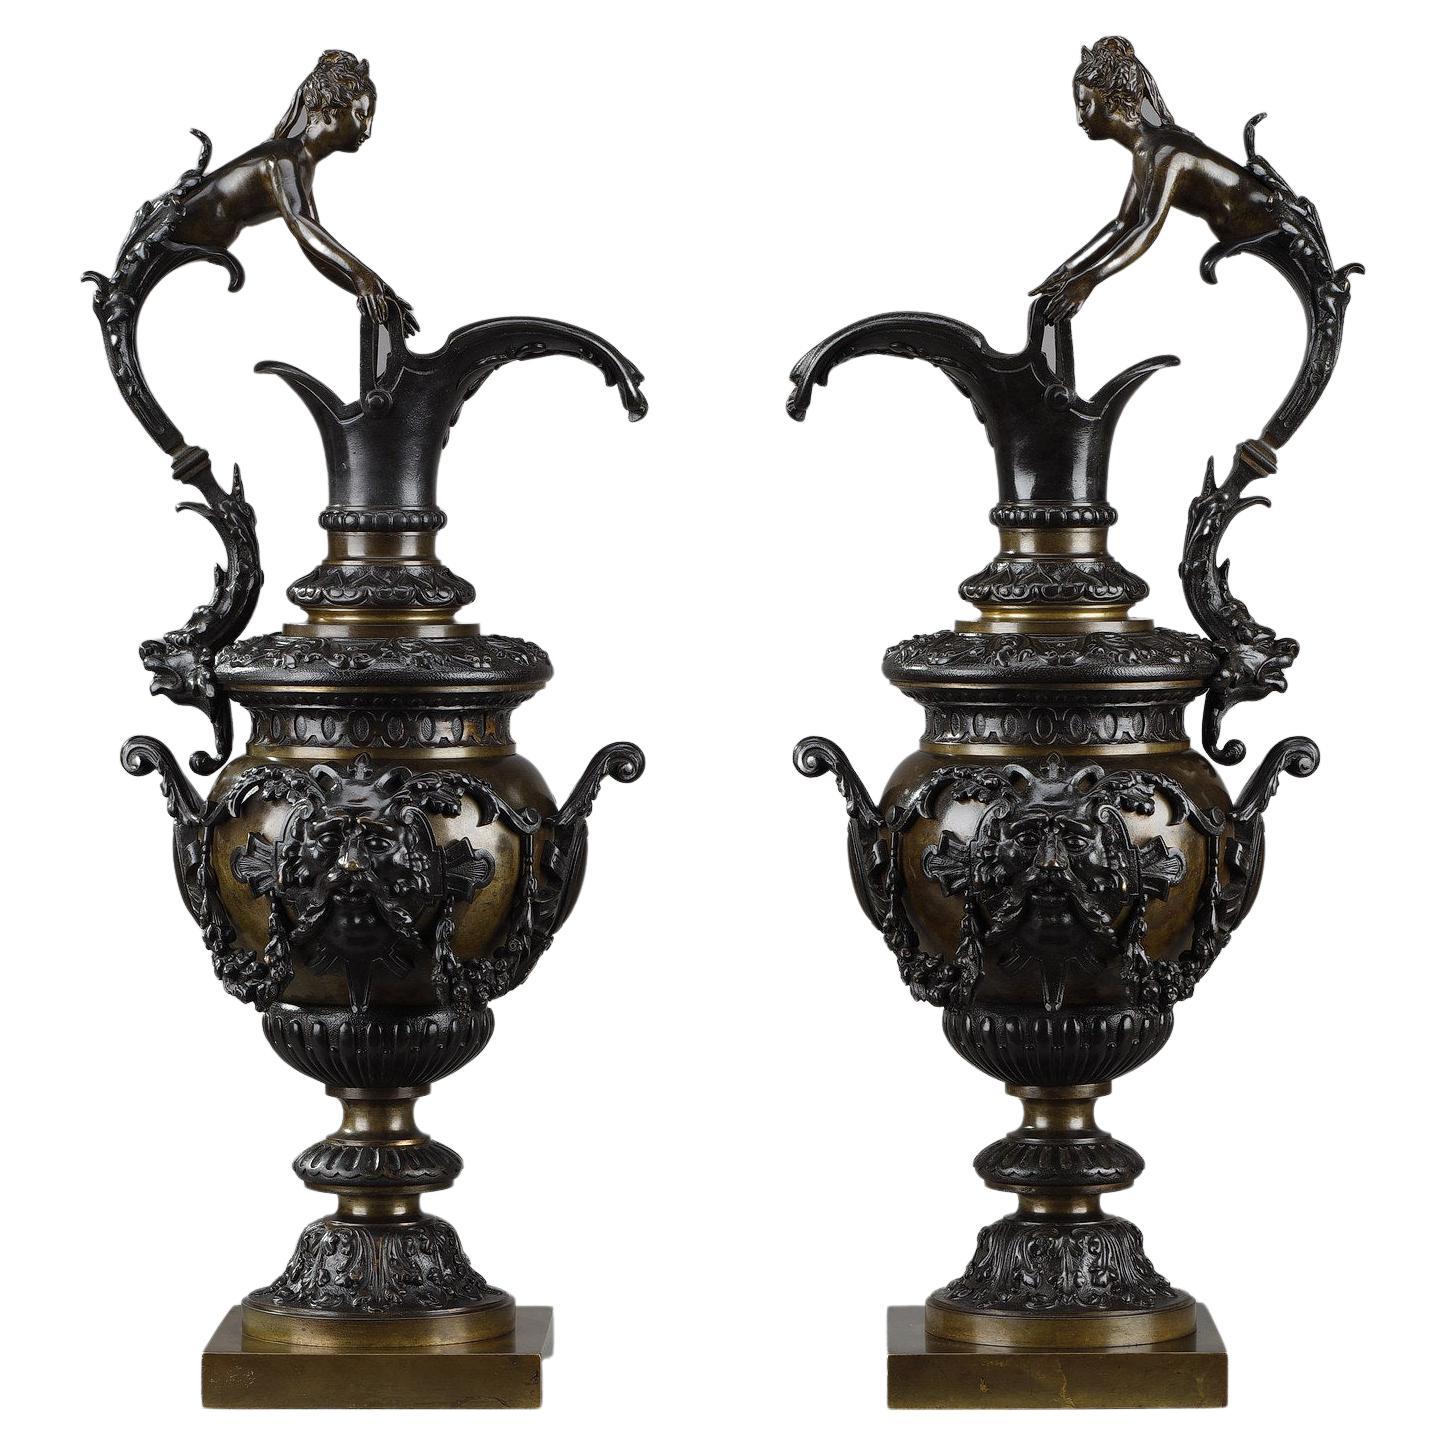 Pair of Decorative Bronze Ewers in the Renaissance Style